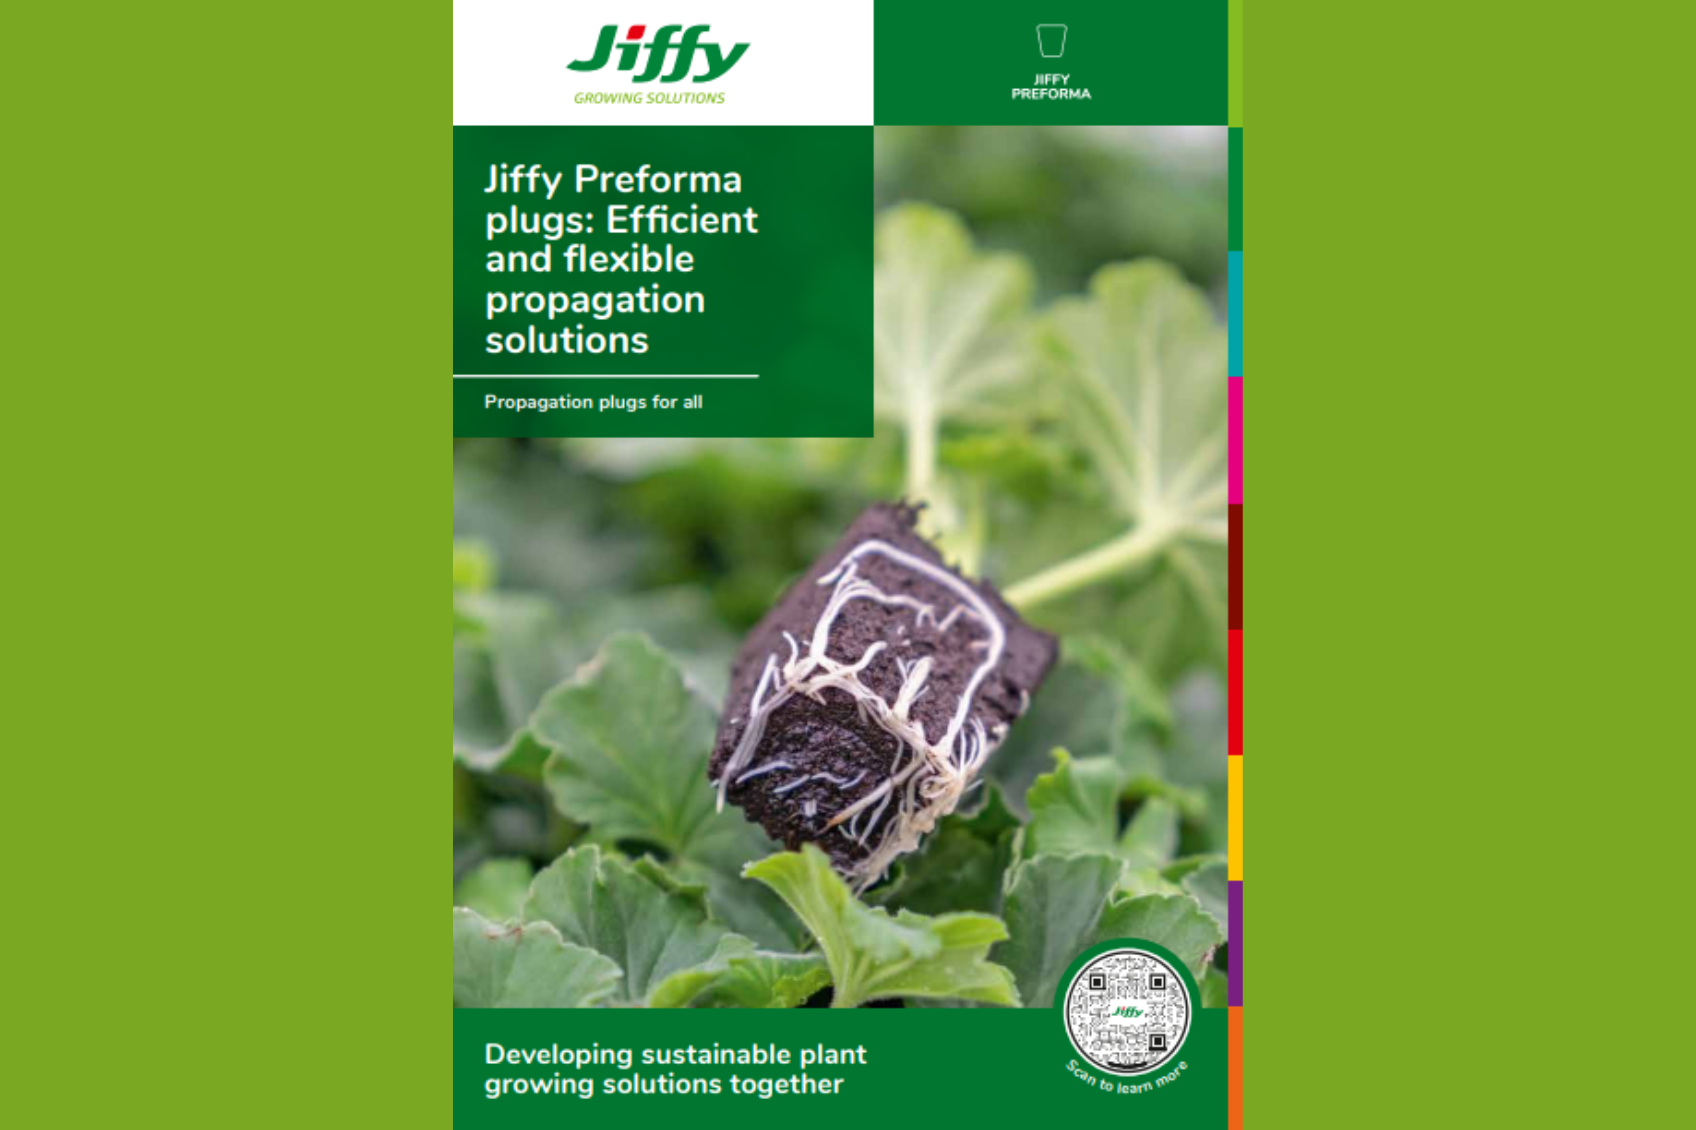 jiffy Preforma lealfet first page a plant plug shwoing the roots